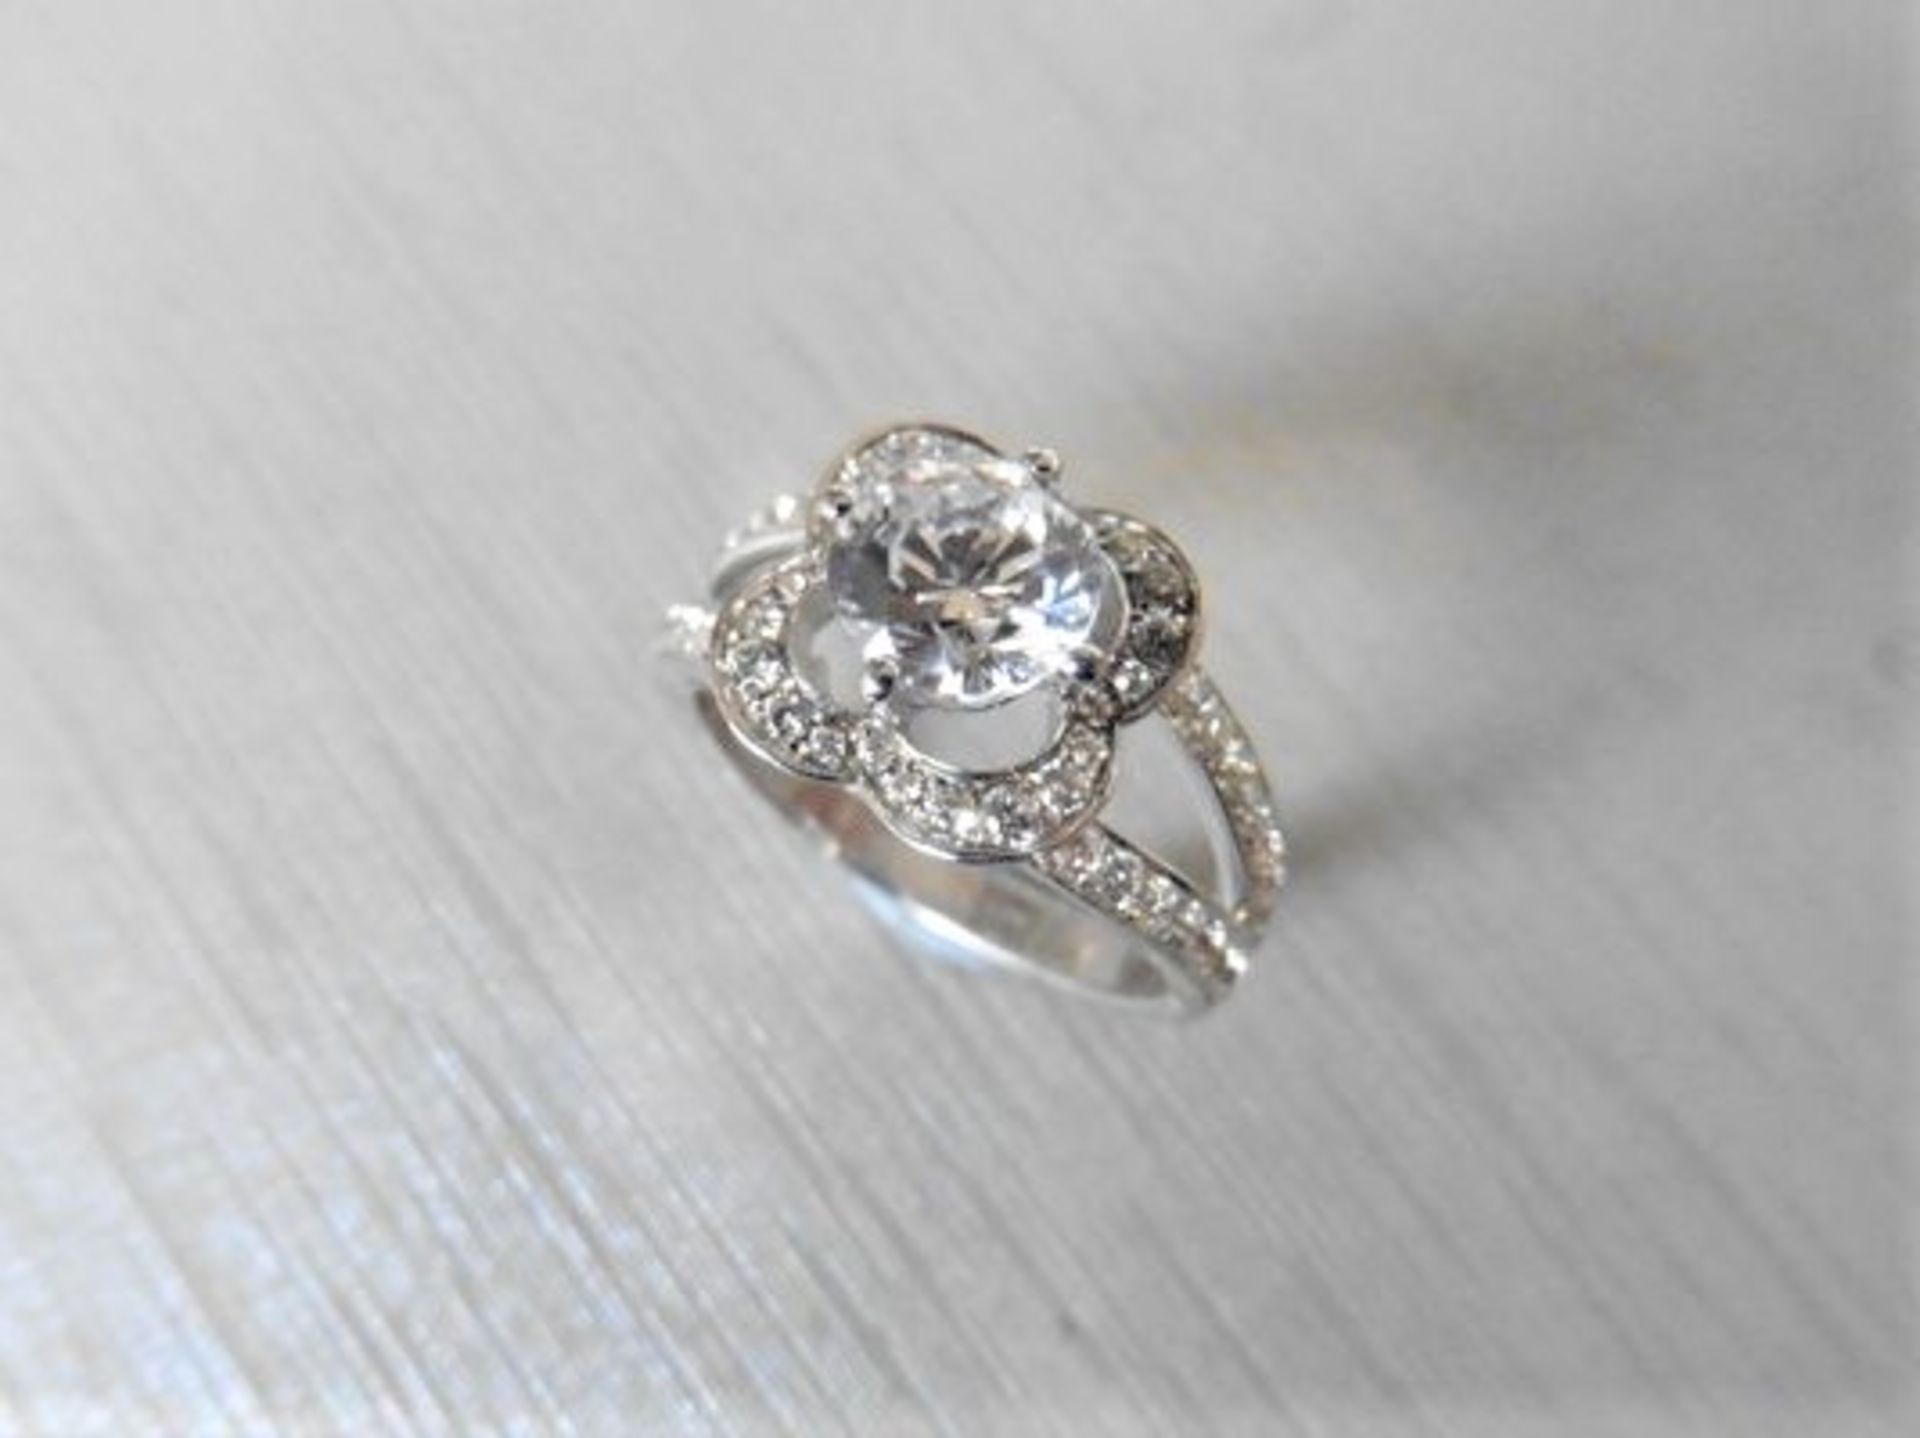 0.50ct diamond set solitaire ring set in platinum. Mount is diamond set with 0.64ct of small